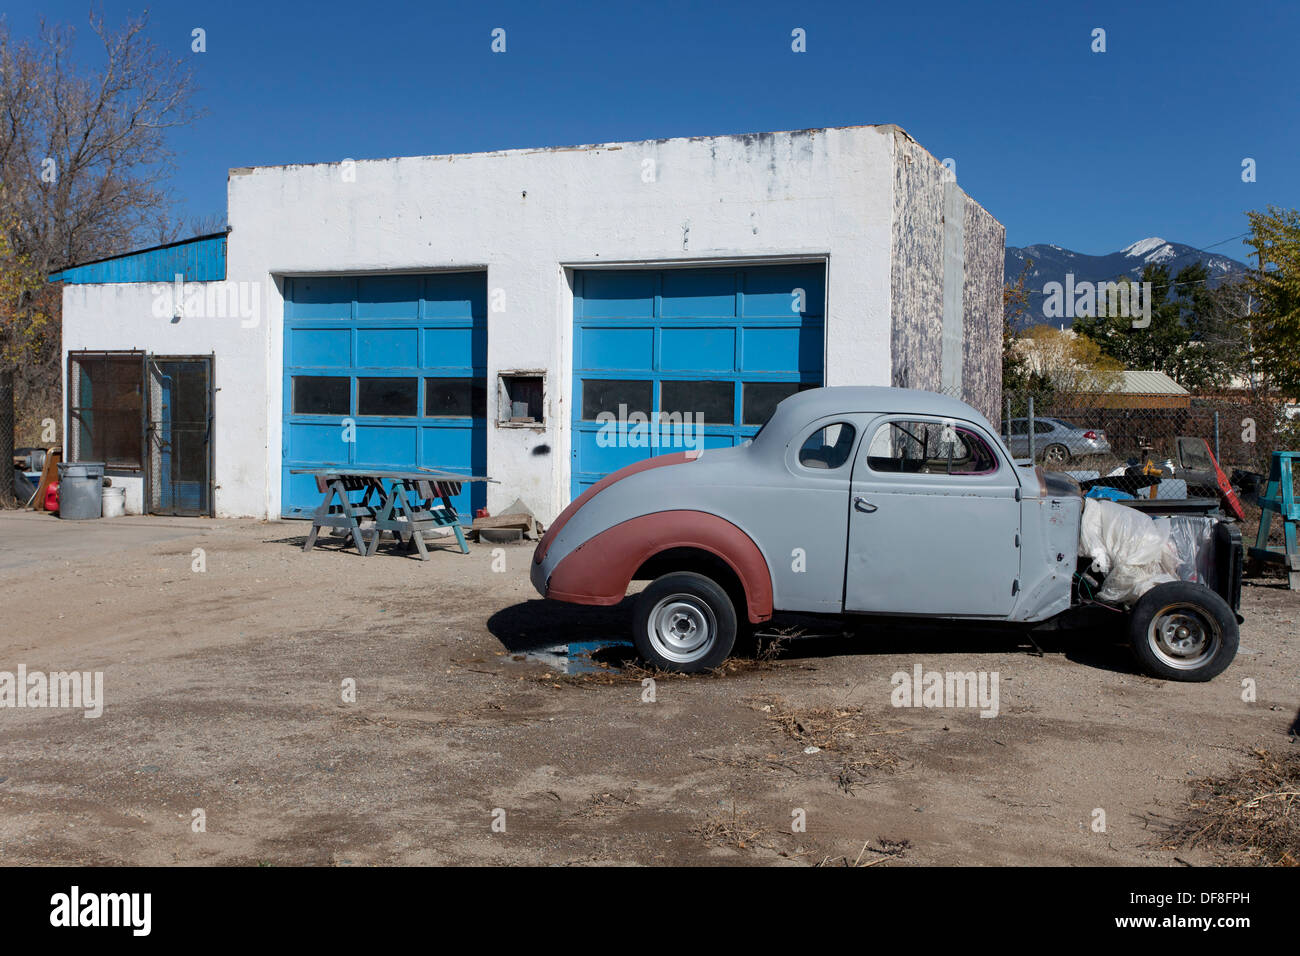 Old garage and car in Taos, New Mexico. Stock Photo